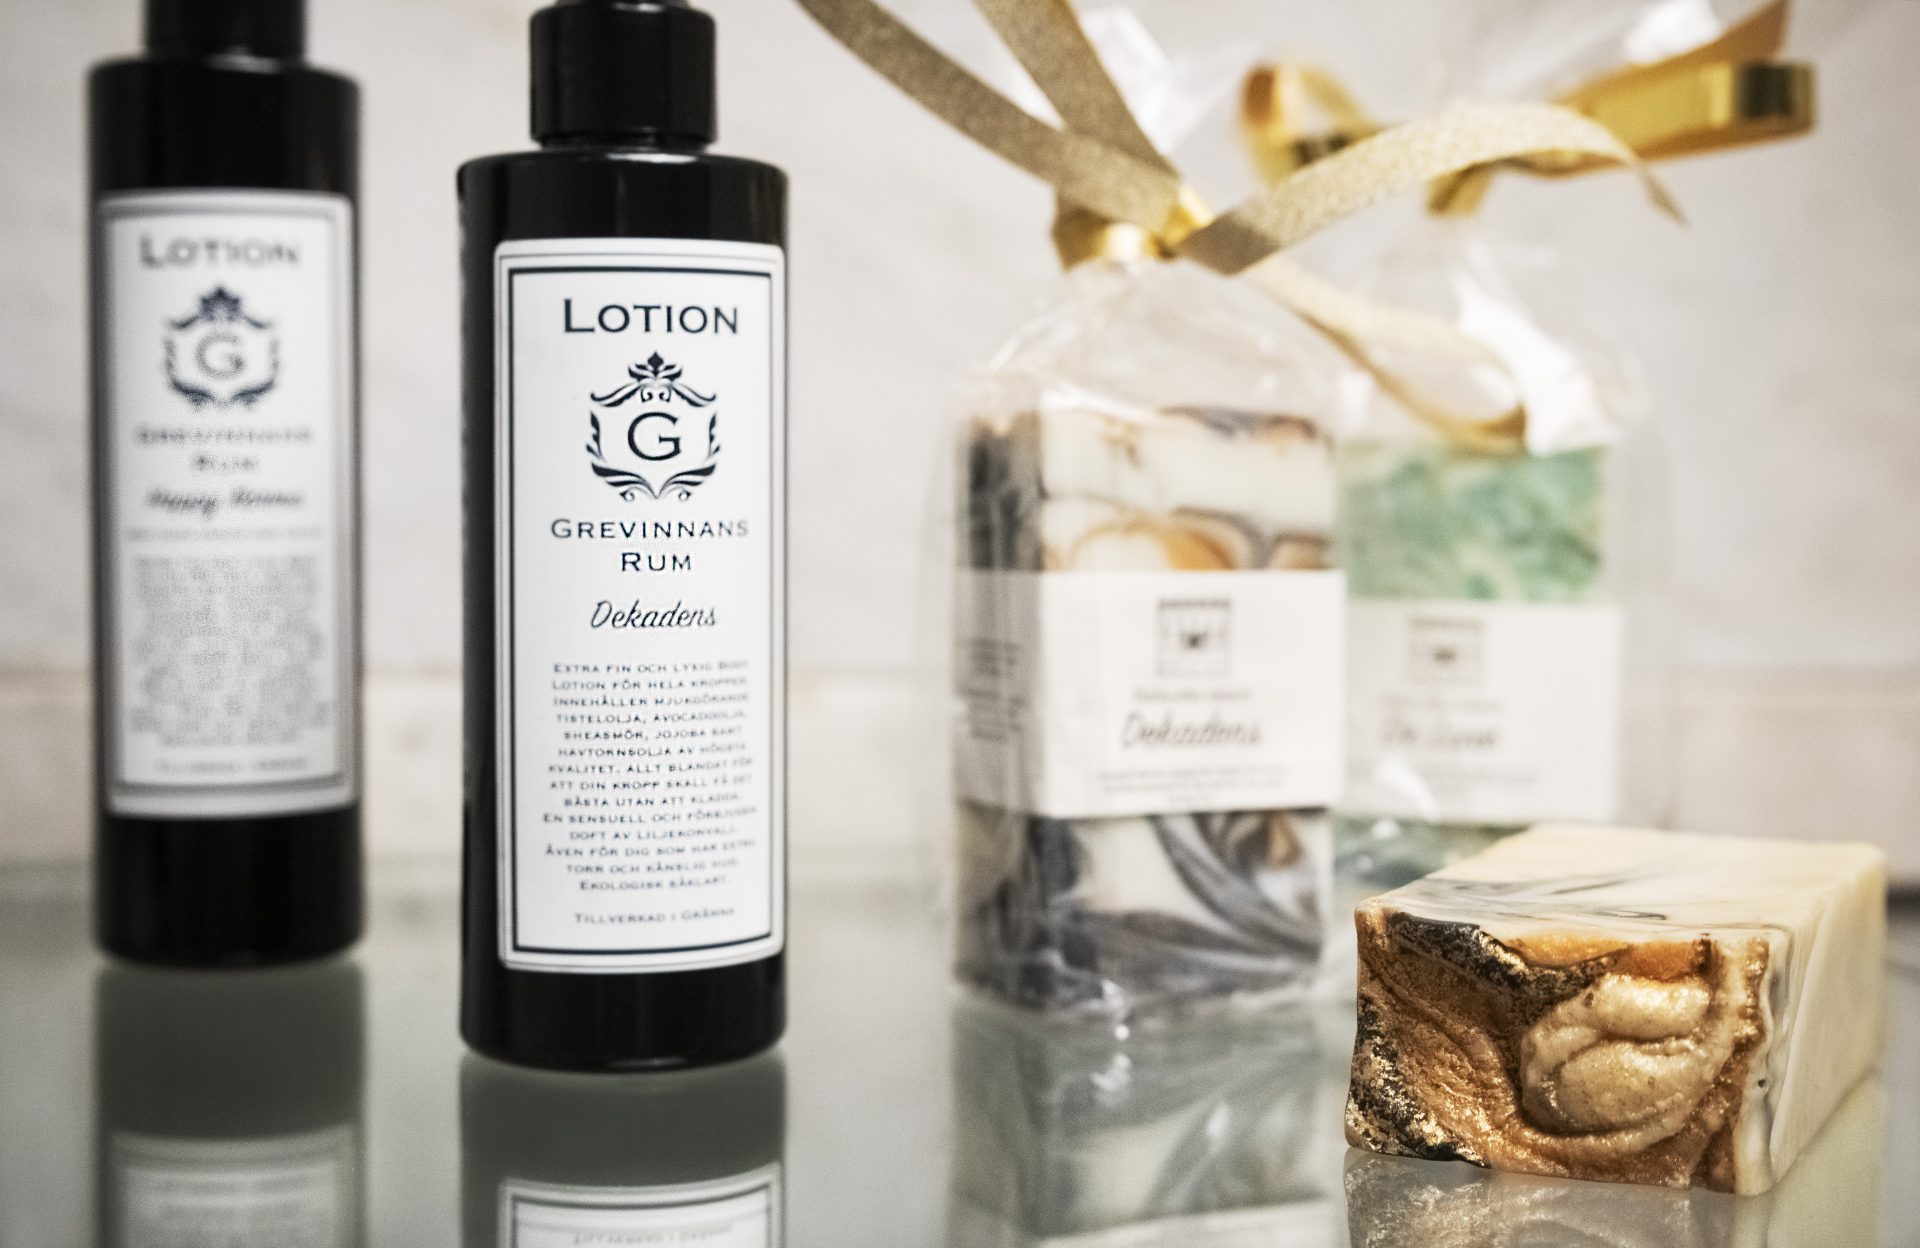 Body lotion and soaps in the museum shop.